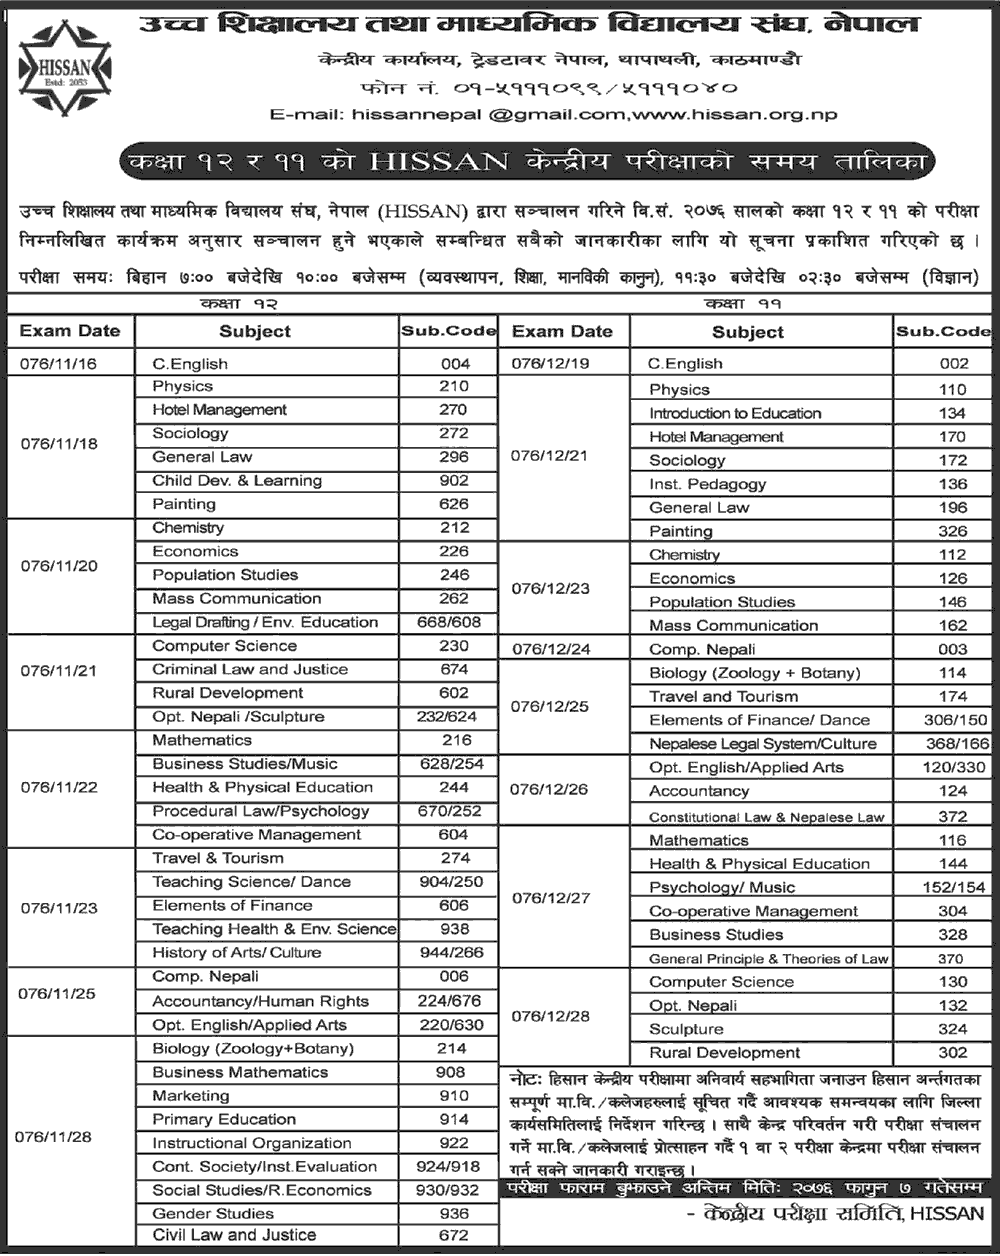 HISSAN Central Examination Routine for the Classes 12 and 11, 2076